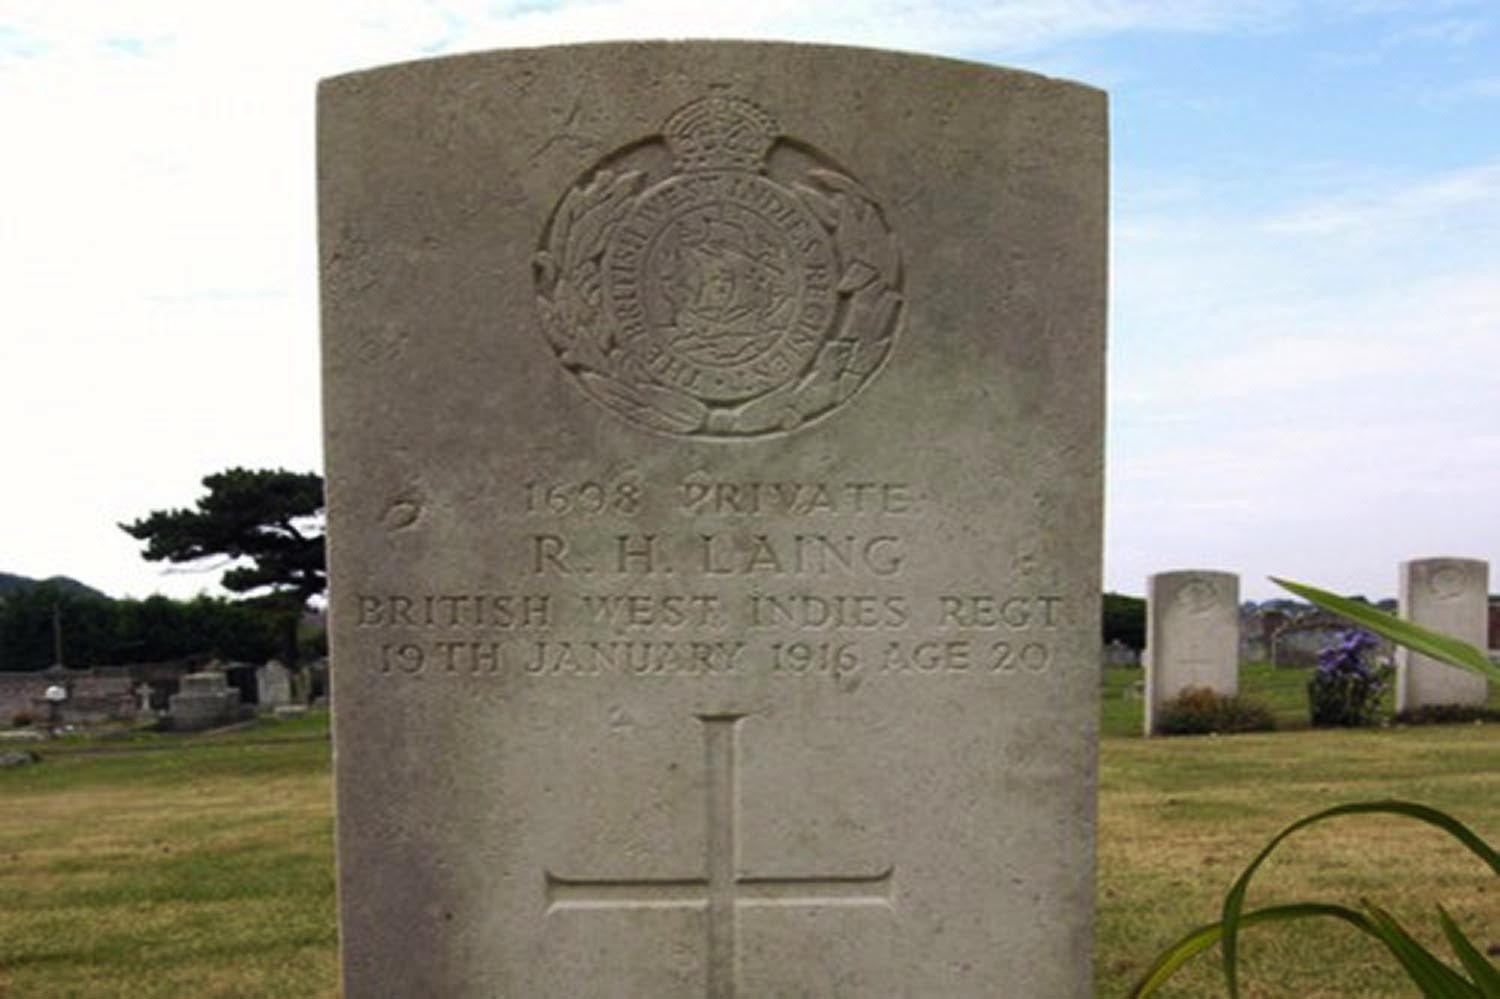 Colour photograph showing the grave of Private R H Laing of the BWIR